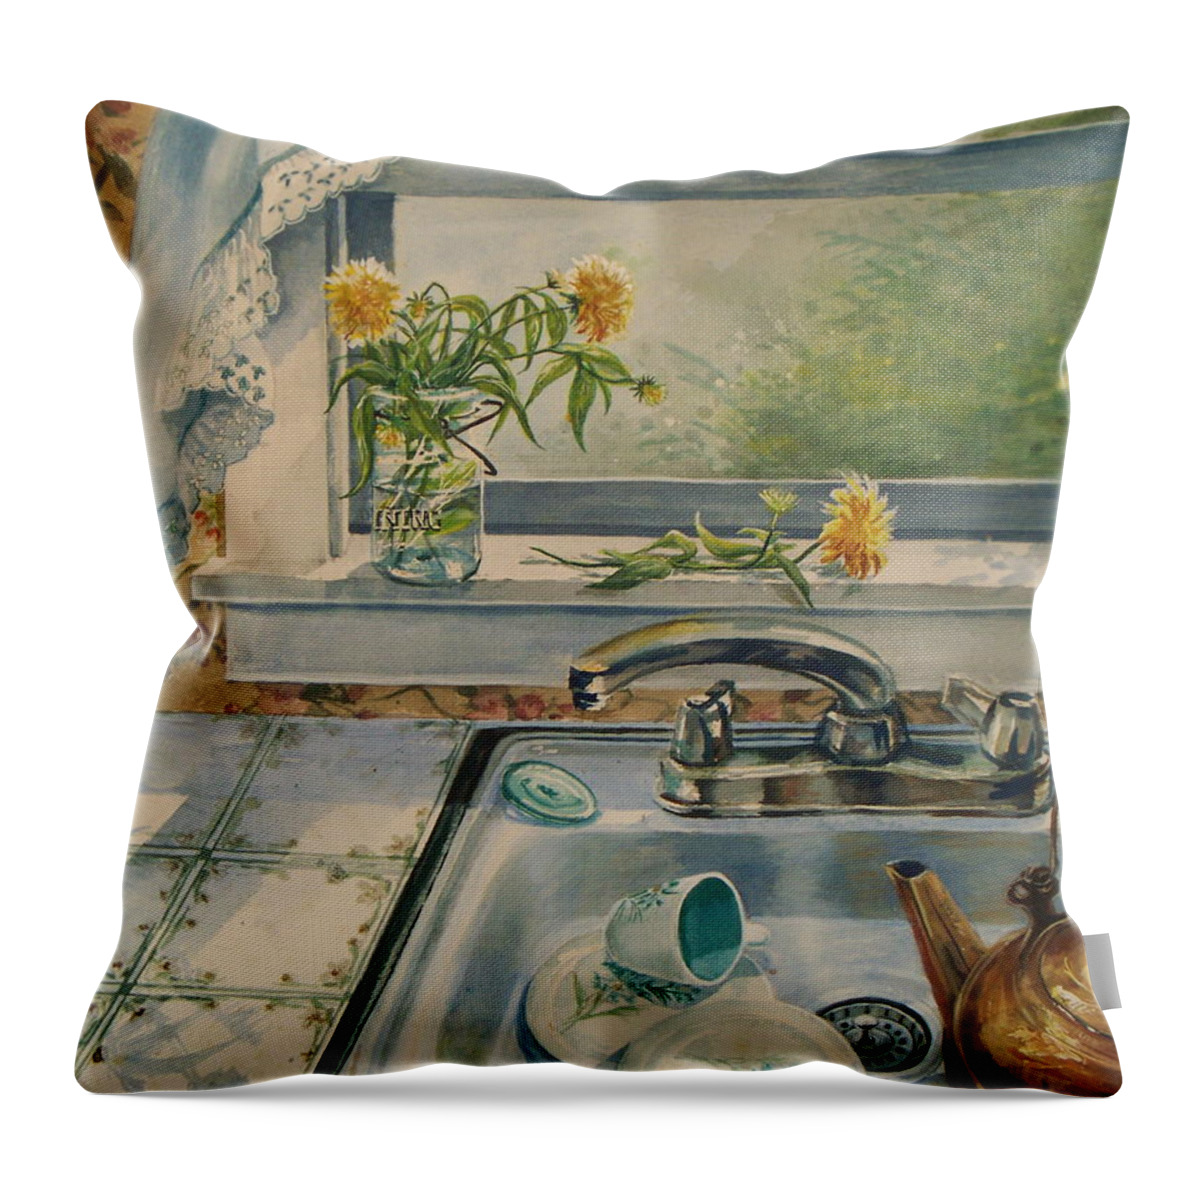  Yellow Flowers Throw Pillow featuring the painting Kitchen Sink by Joy Nichols